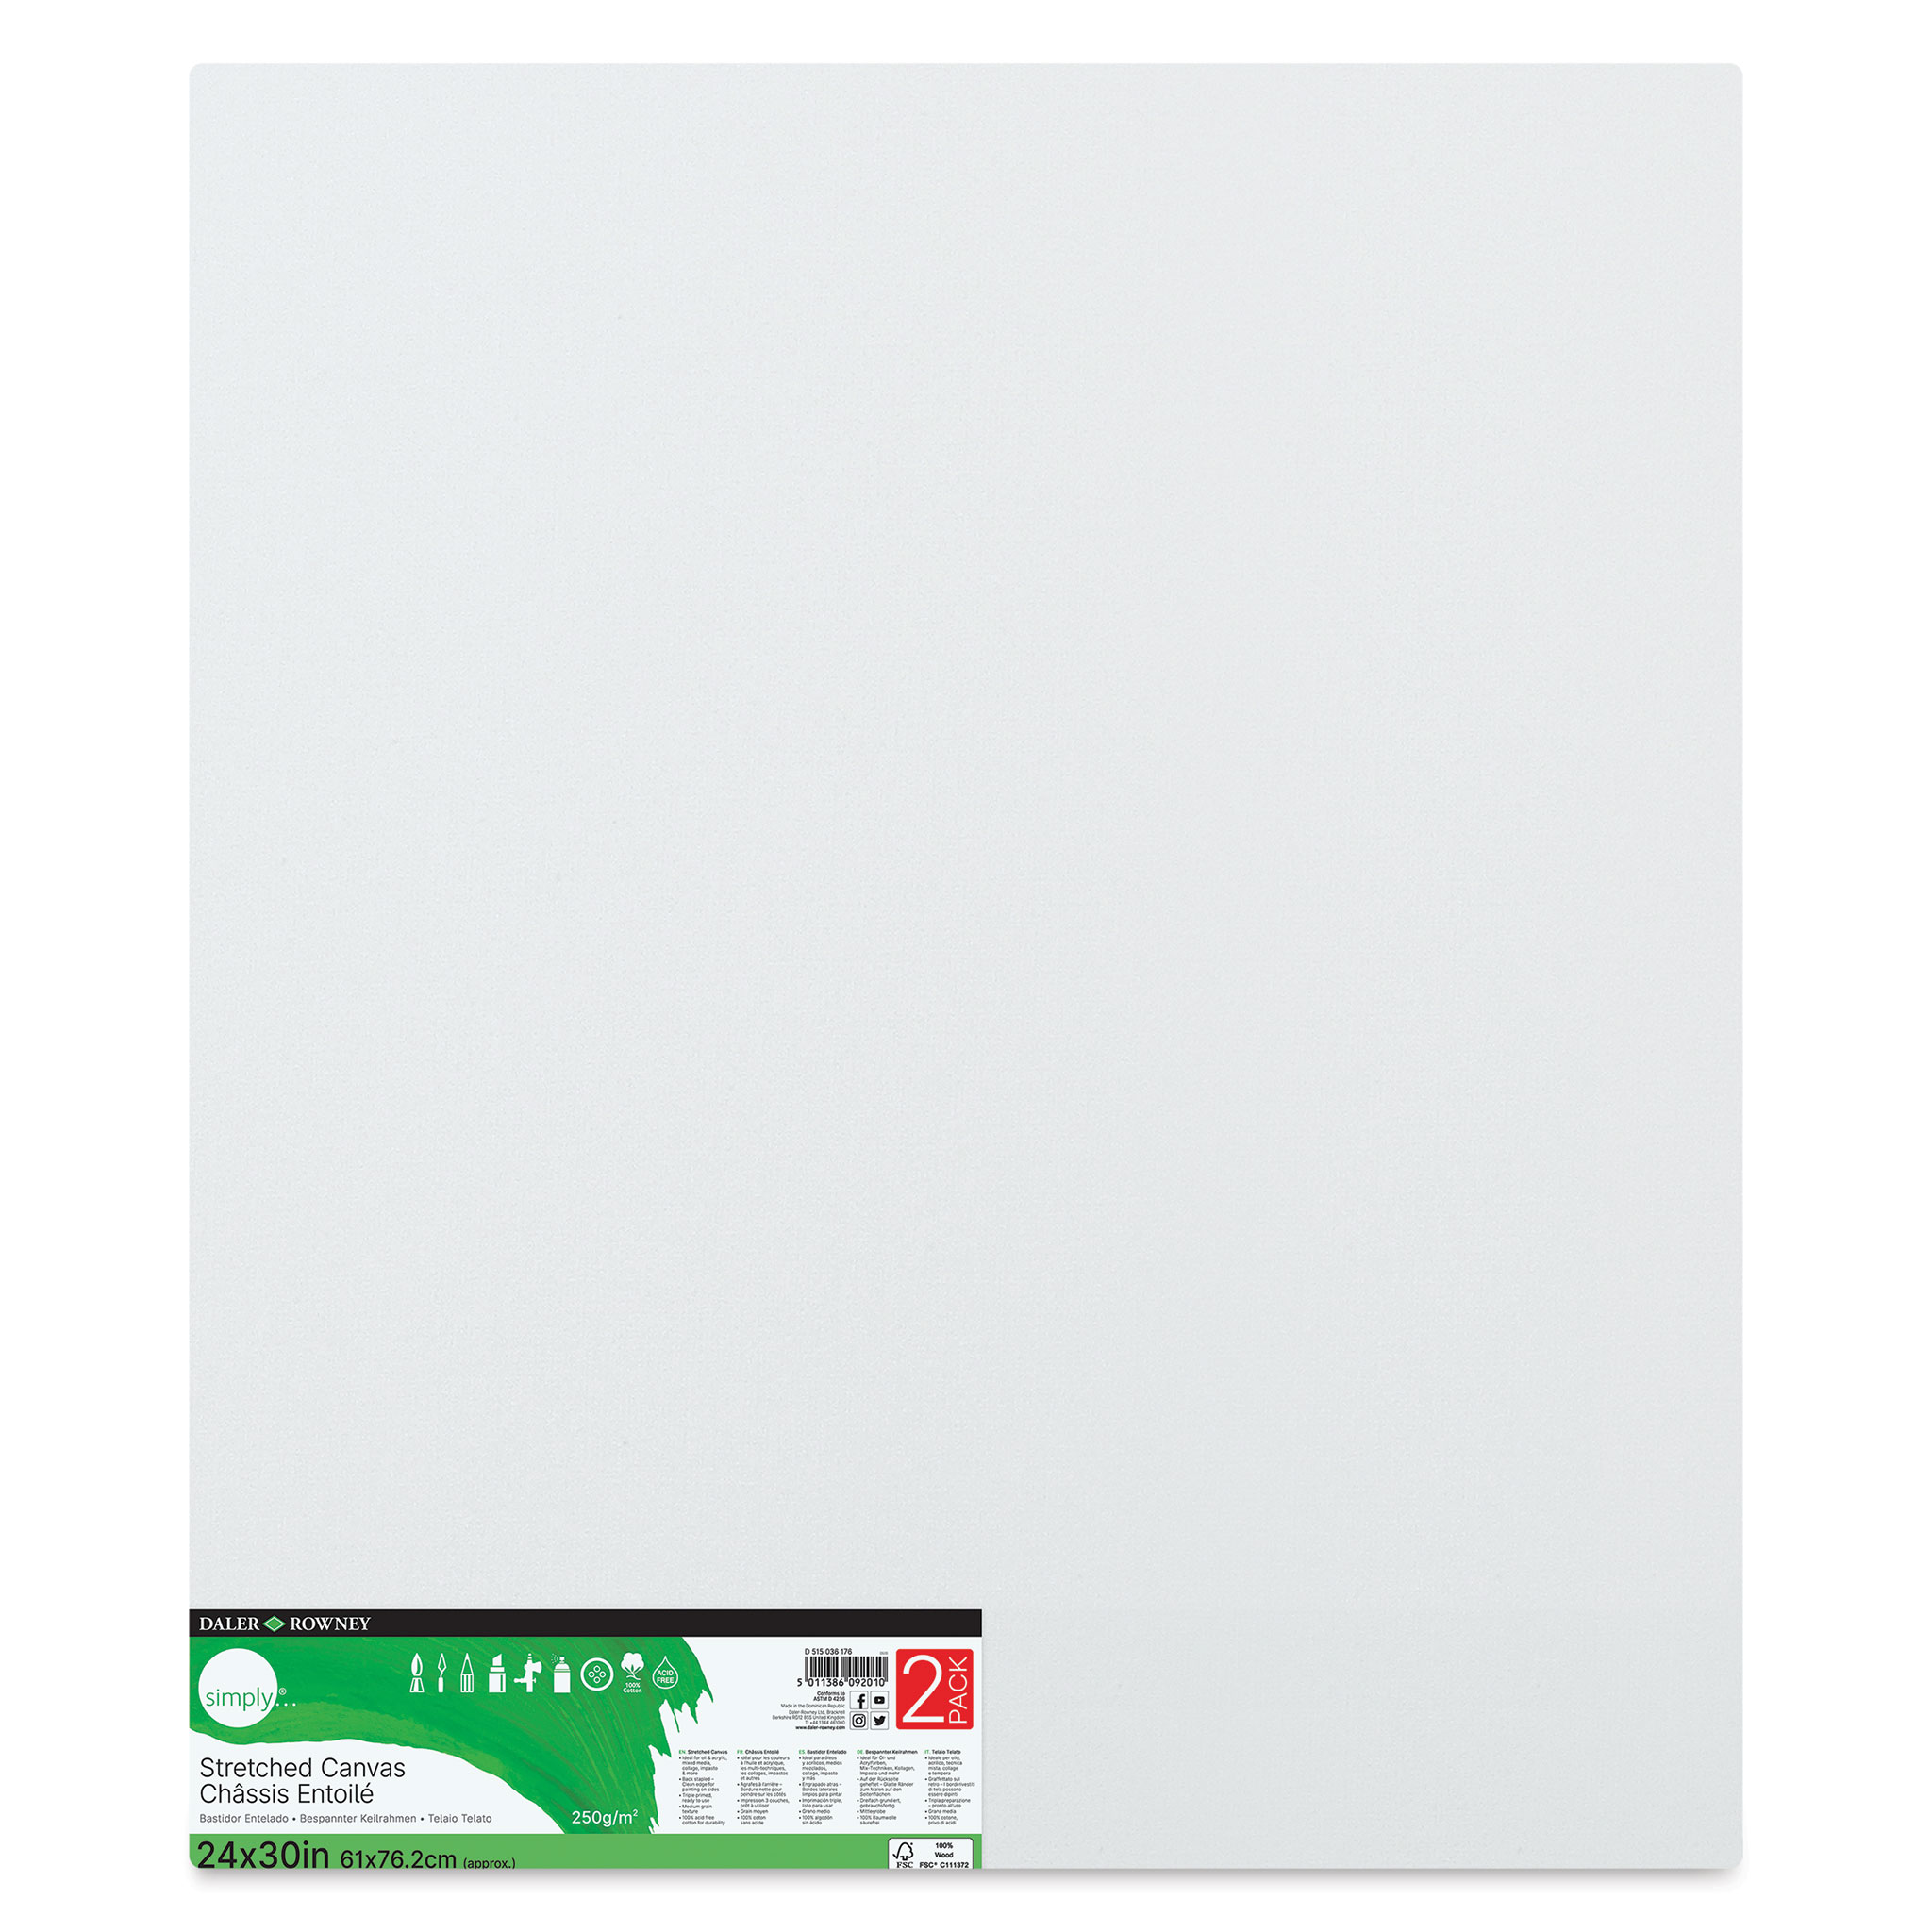 Daler-Rowney Simply Stretched Cotton Canvases - Pkg of 2, 24' x 30'